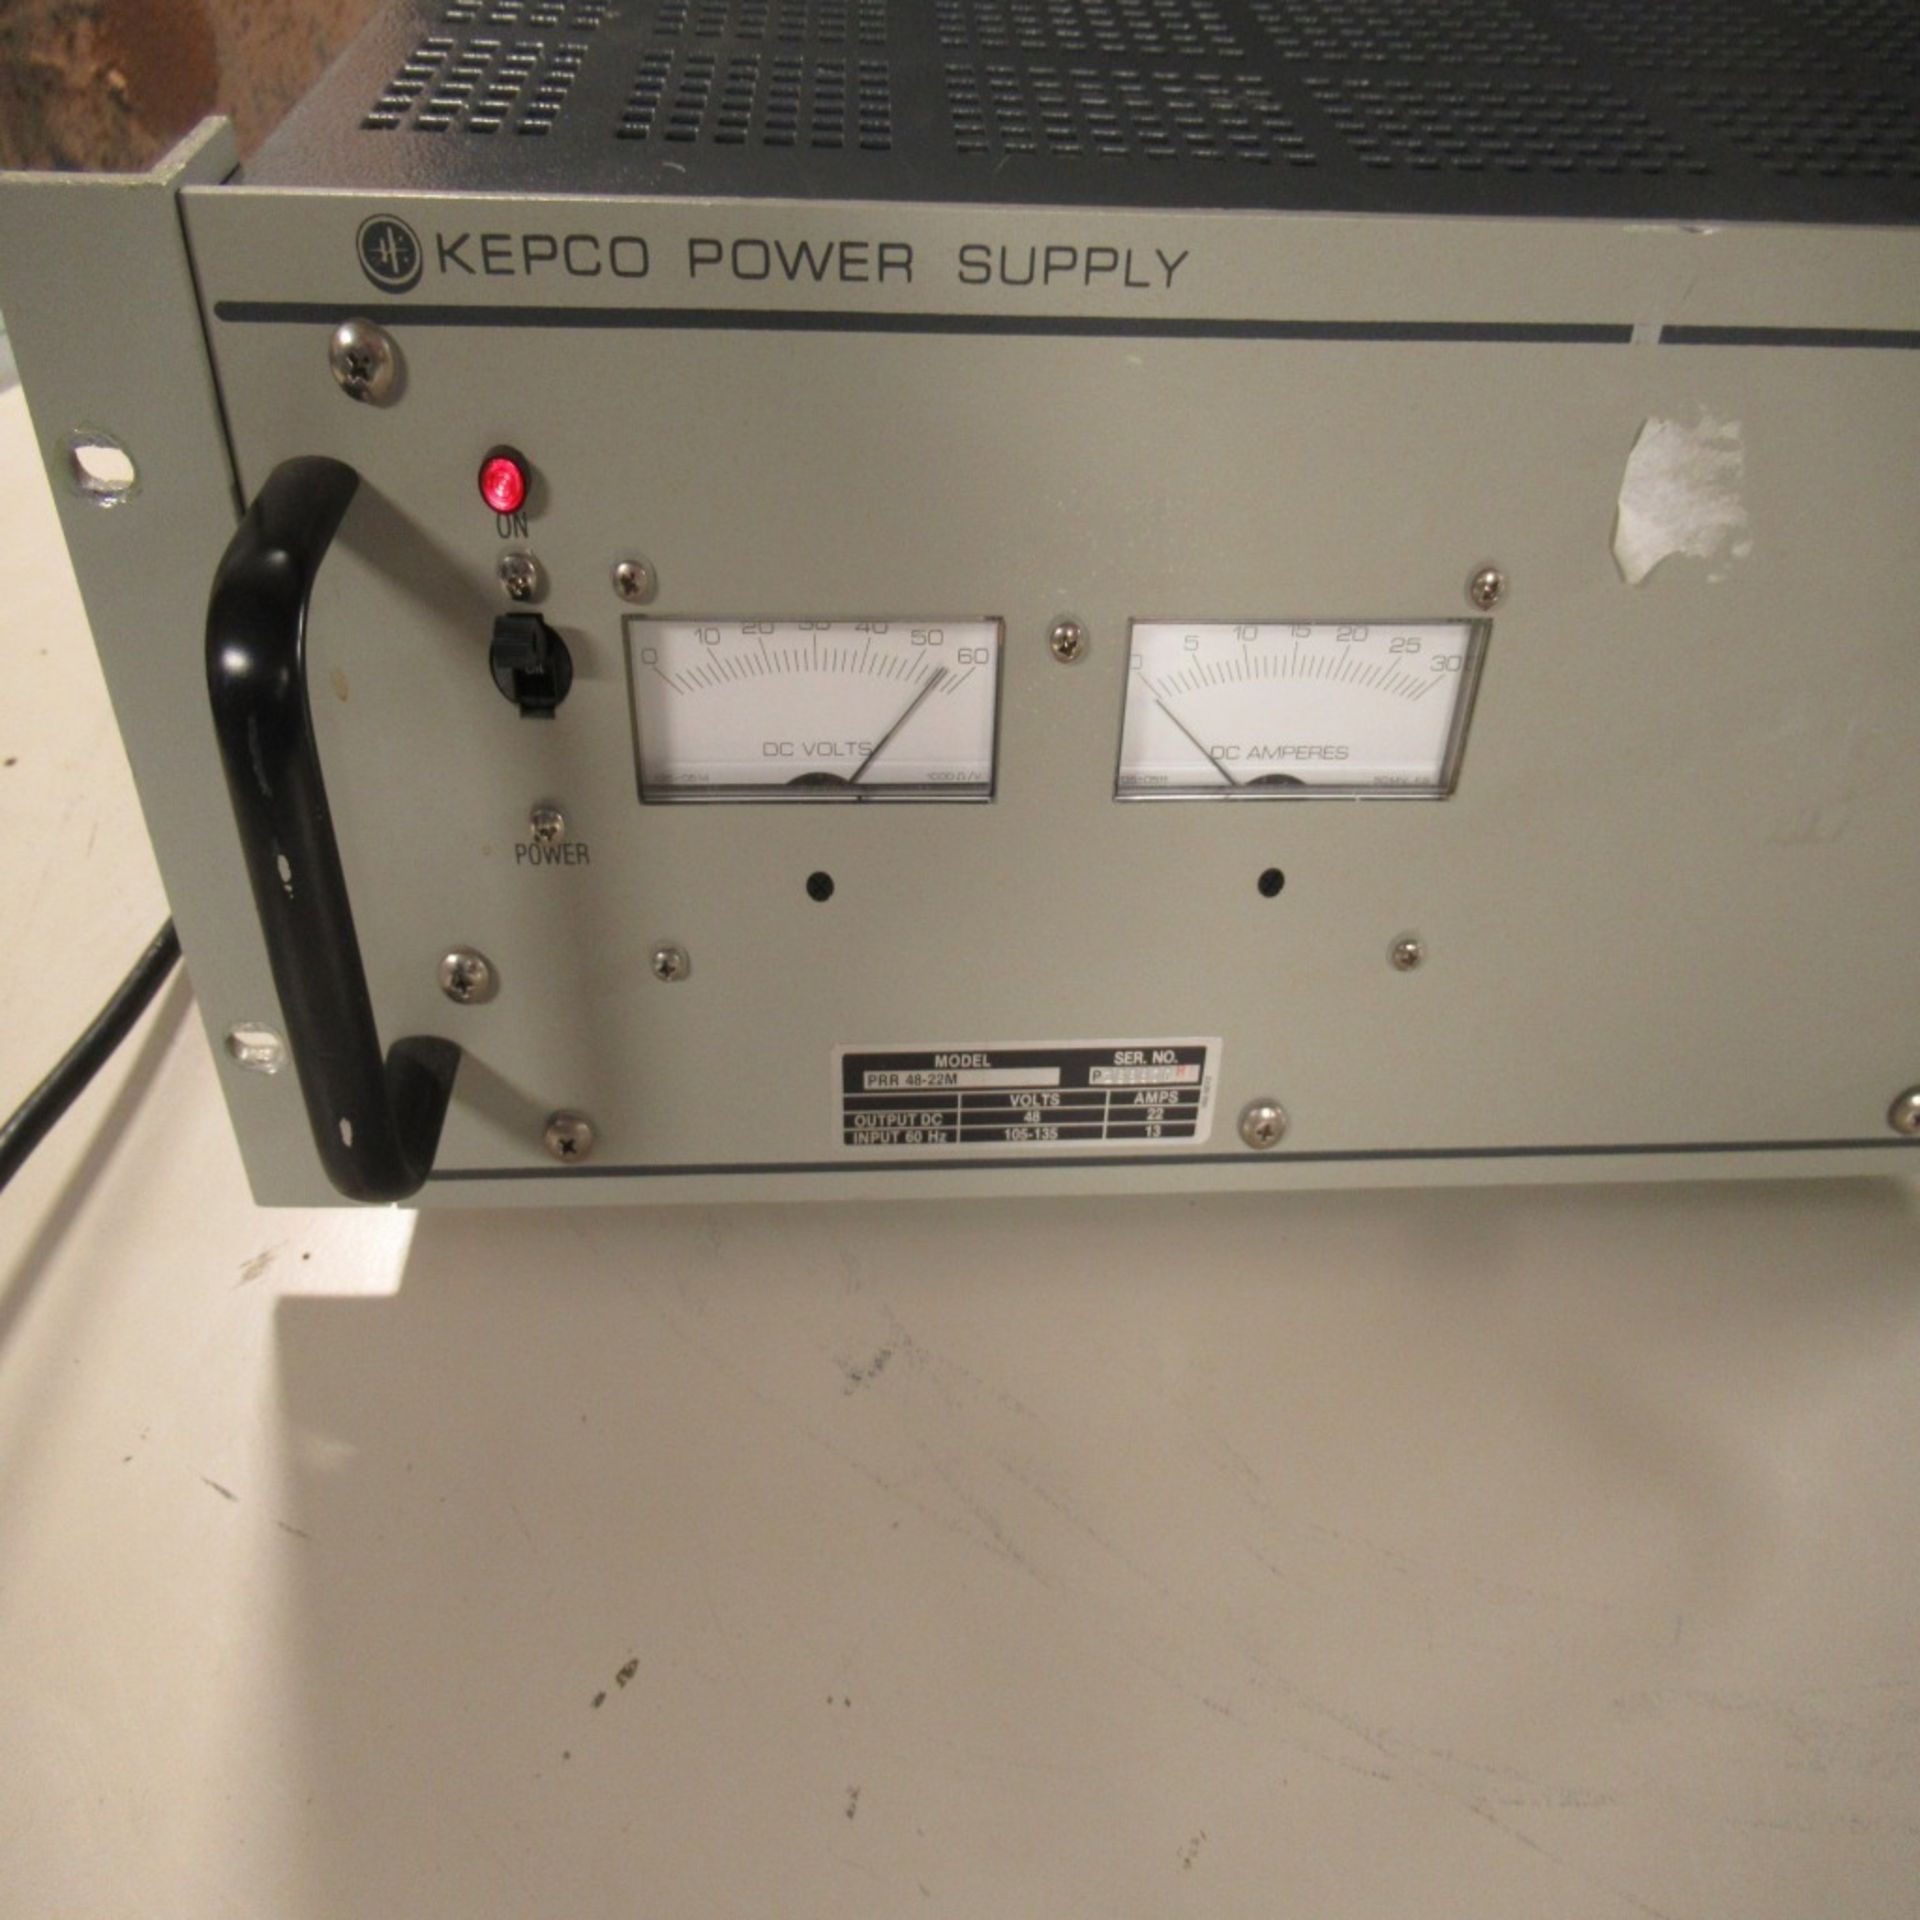 PHOTON SNAP SHOT MODEL 6000 *POWERS ON* NO SCREEN DISPLAY; FARNELL AP20-80 REGULATED POWER SUPPLY * - Image 17 of 222